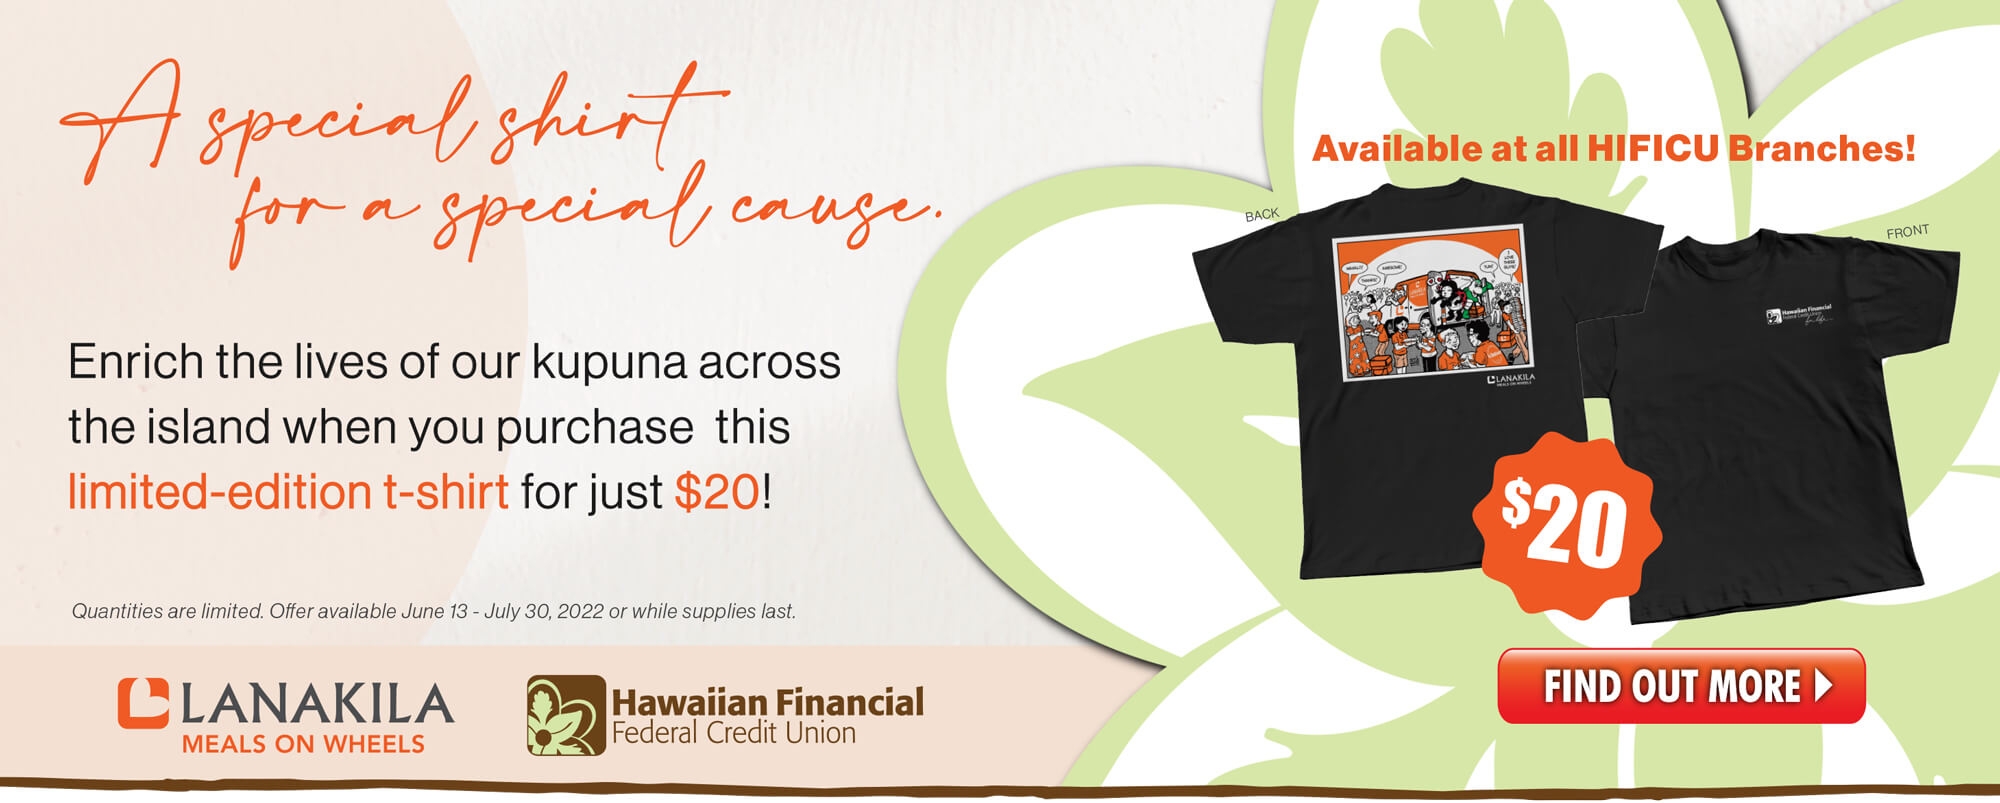 A special shirt for a special cause.  Purchase this limited edition t-shirt to support Lanakila Meals on Wheels